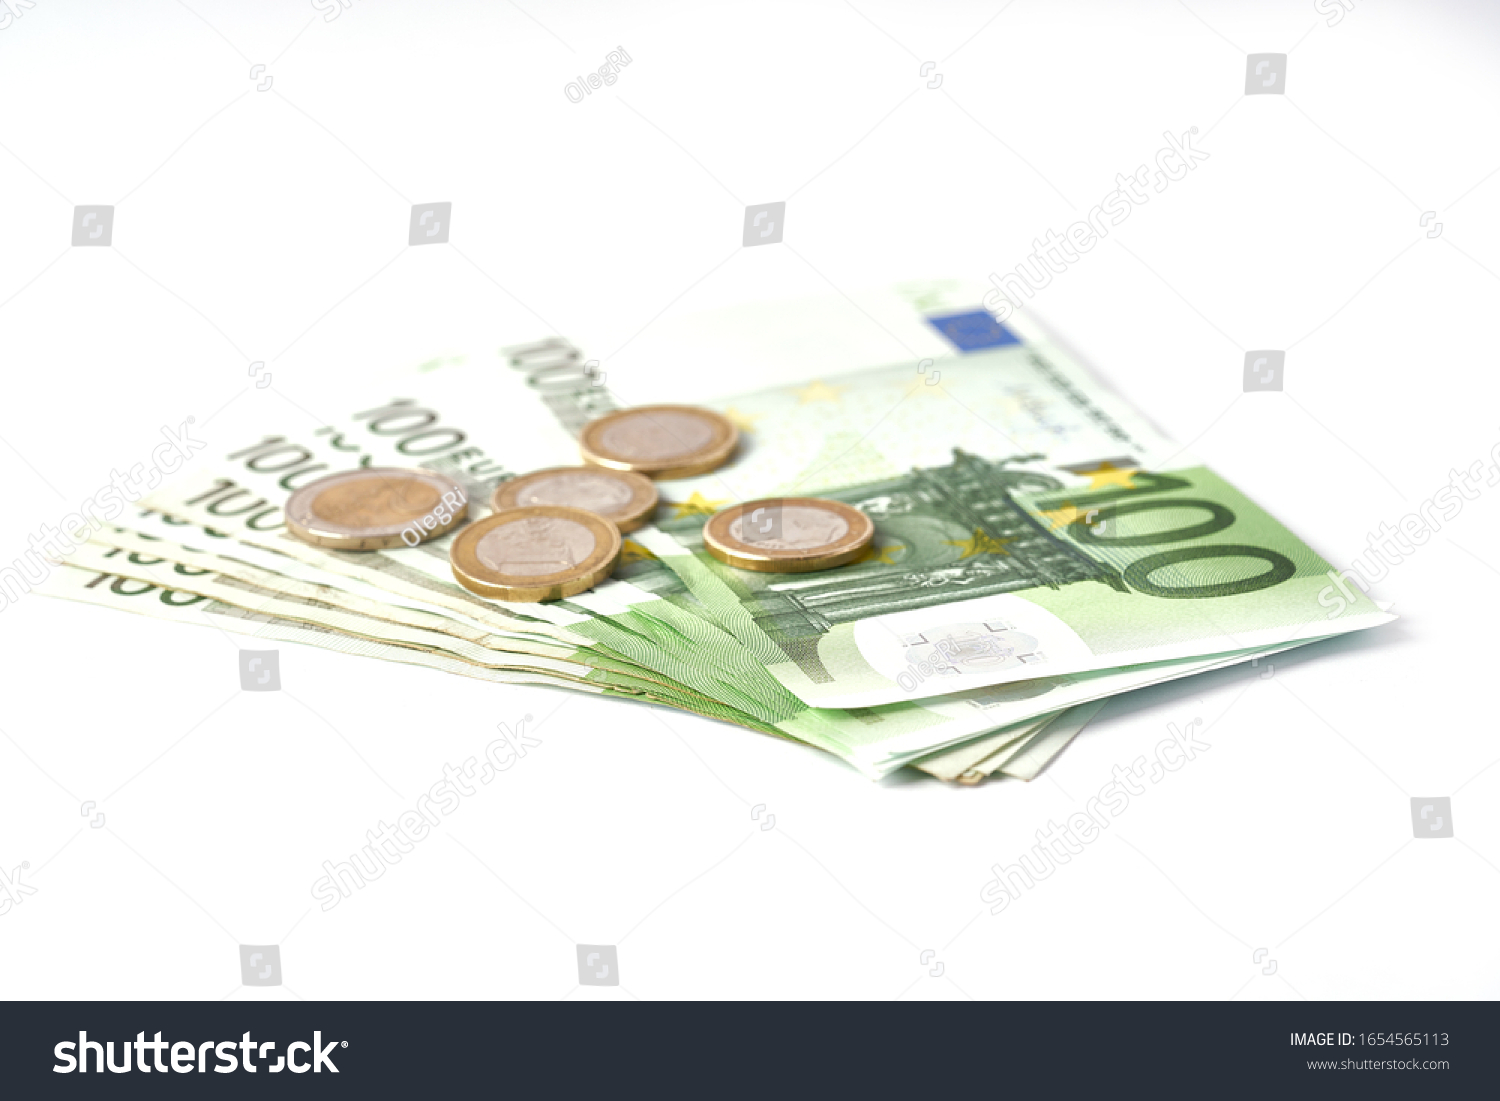 Money laundering on clothesline on light background. 100 eur notes. Banknotes and coins at white background #1654565113